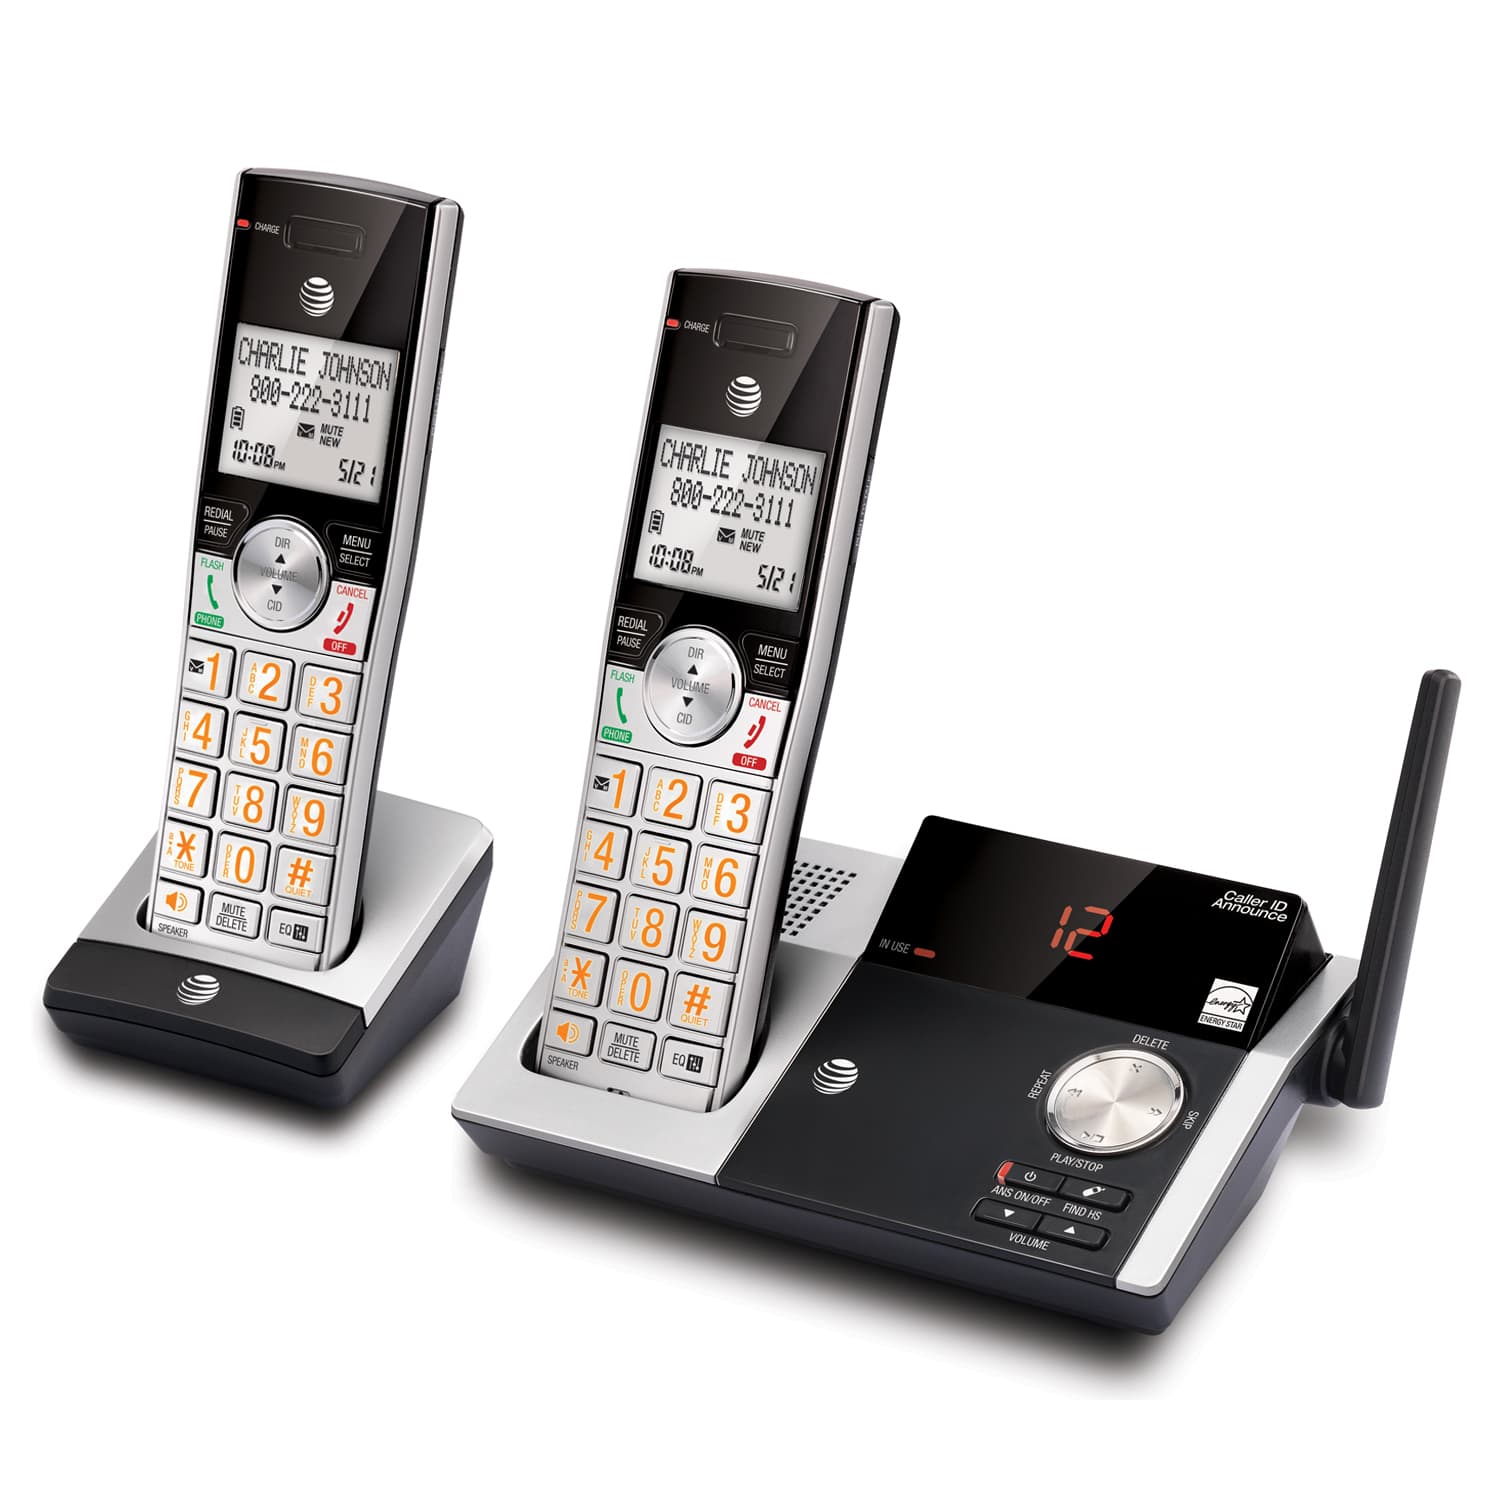 2 handset cordless answering system with caller ID/call waiting - view 2